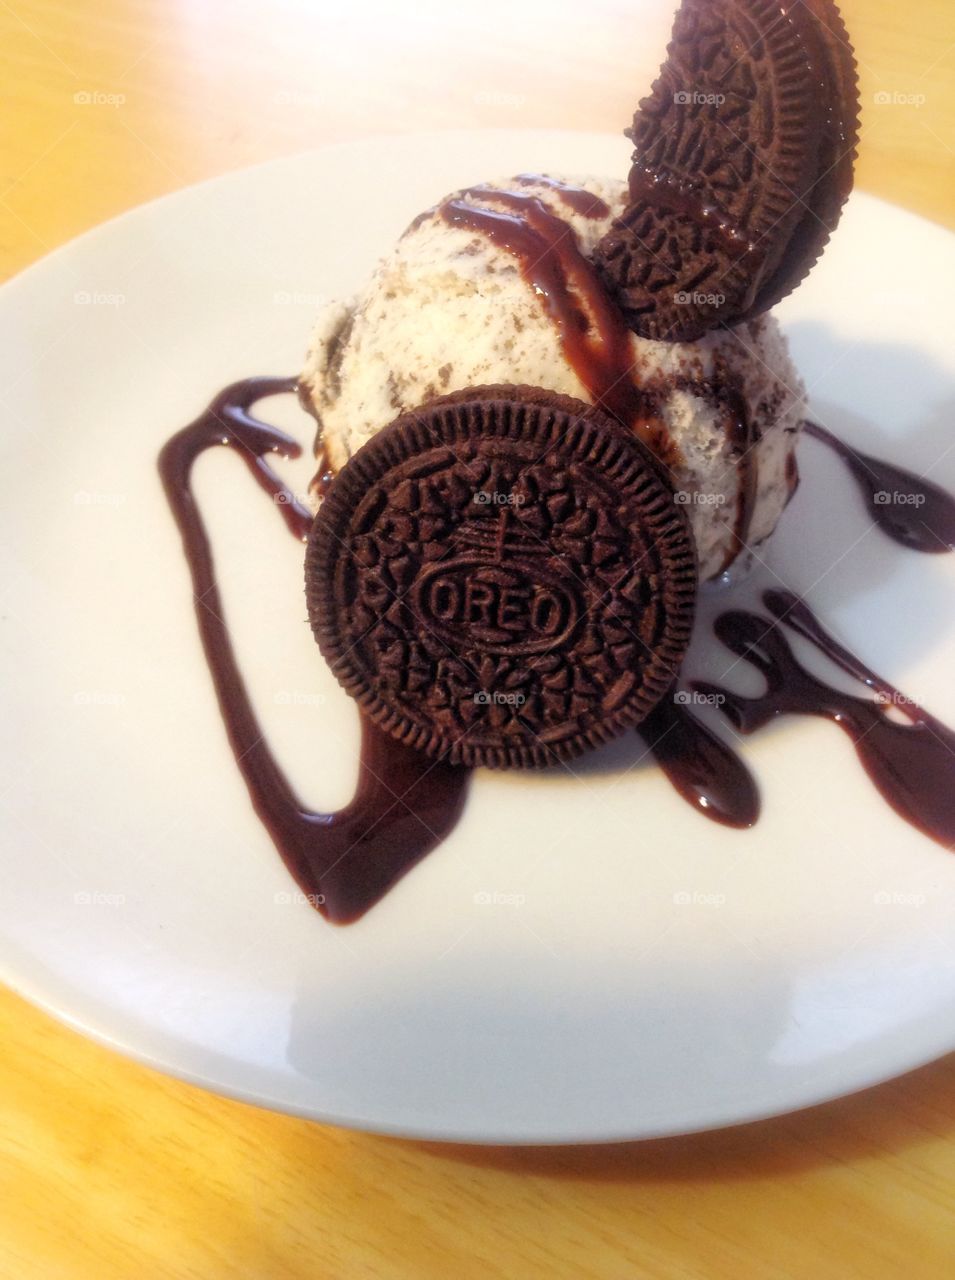 Oreo ice cream topped with chocolate syrup and Oreos 